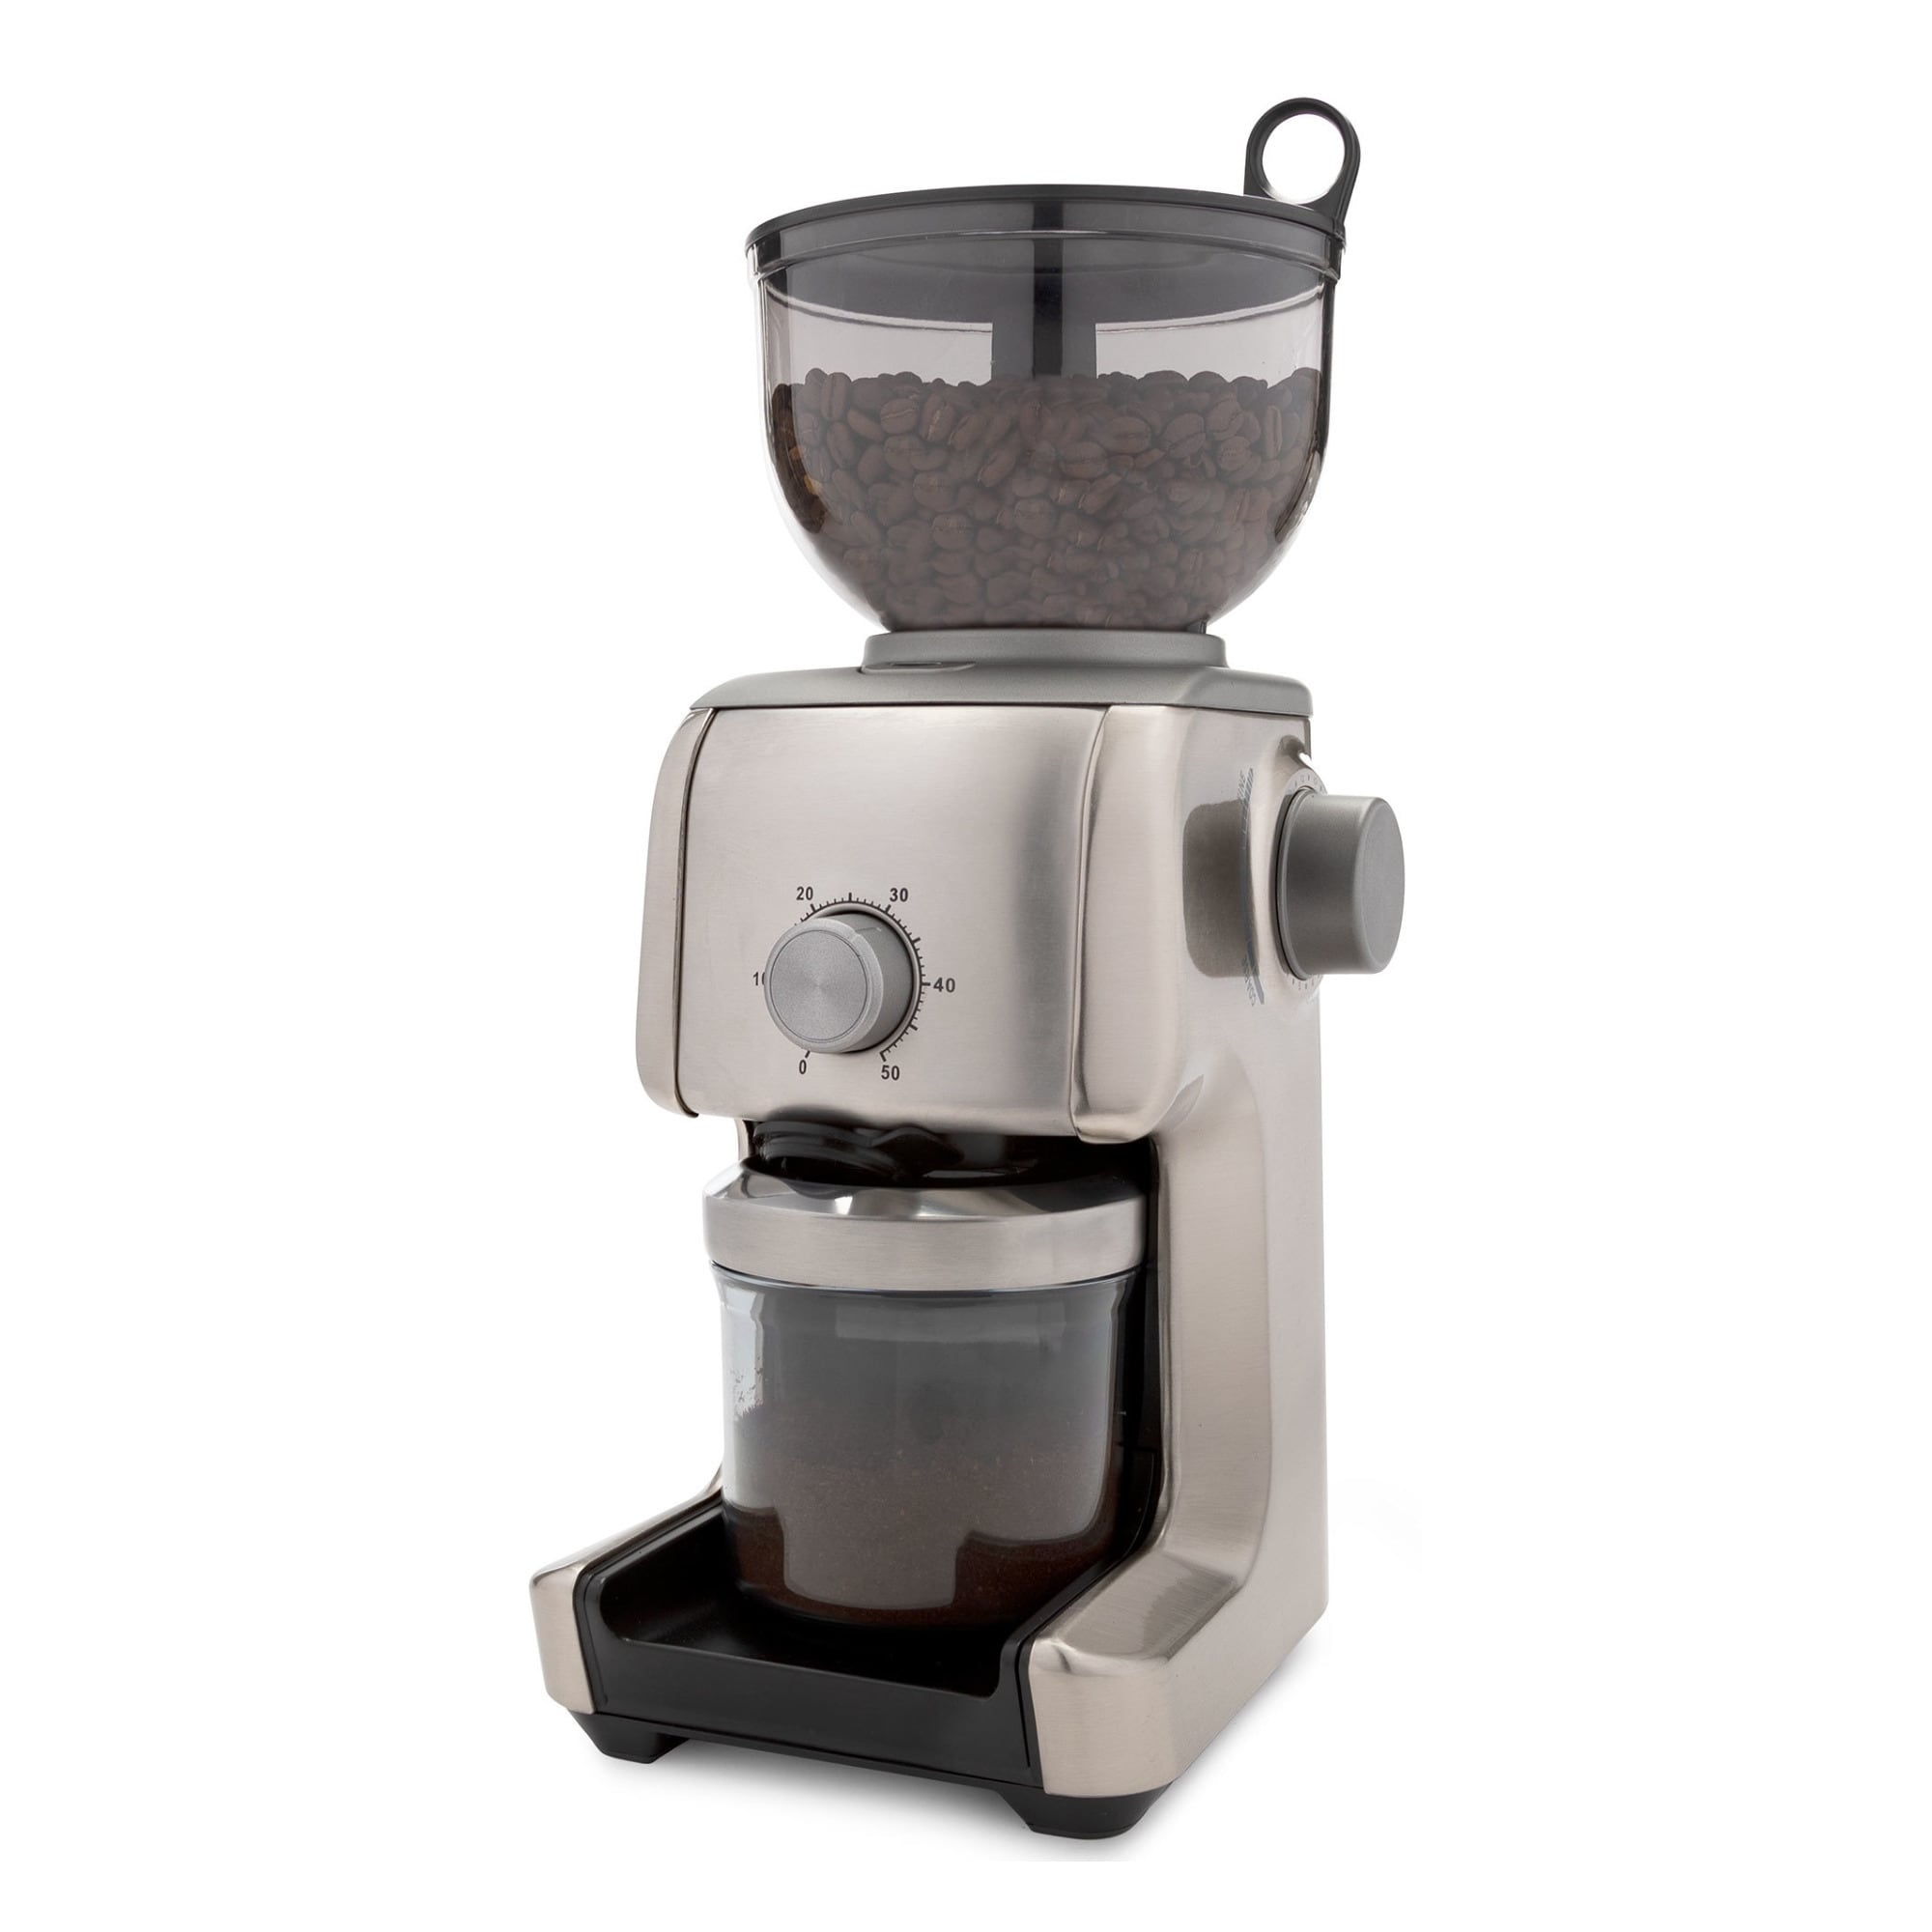 Kaffe Electric Coffee Grinder with Cleaning Brush - Silver - KF2020